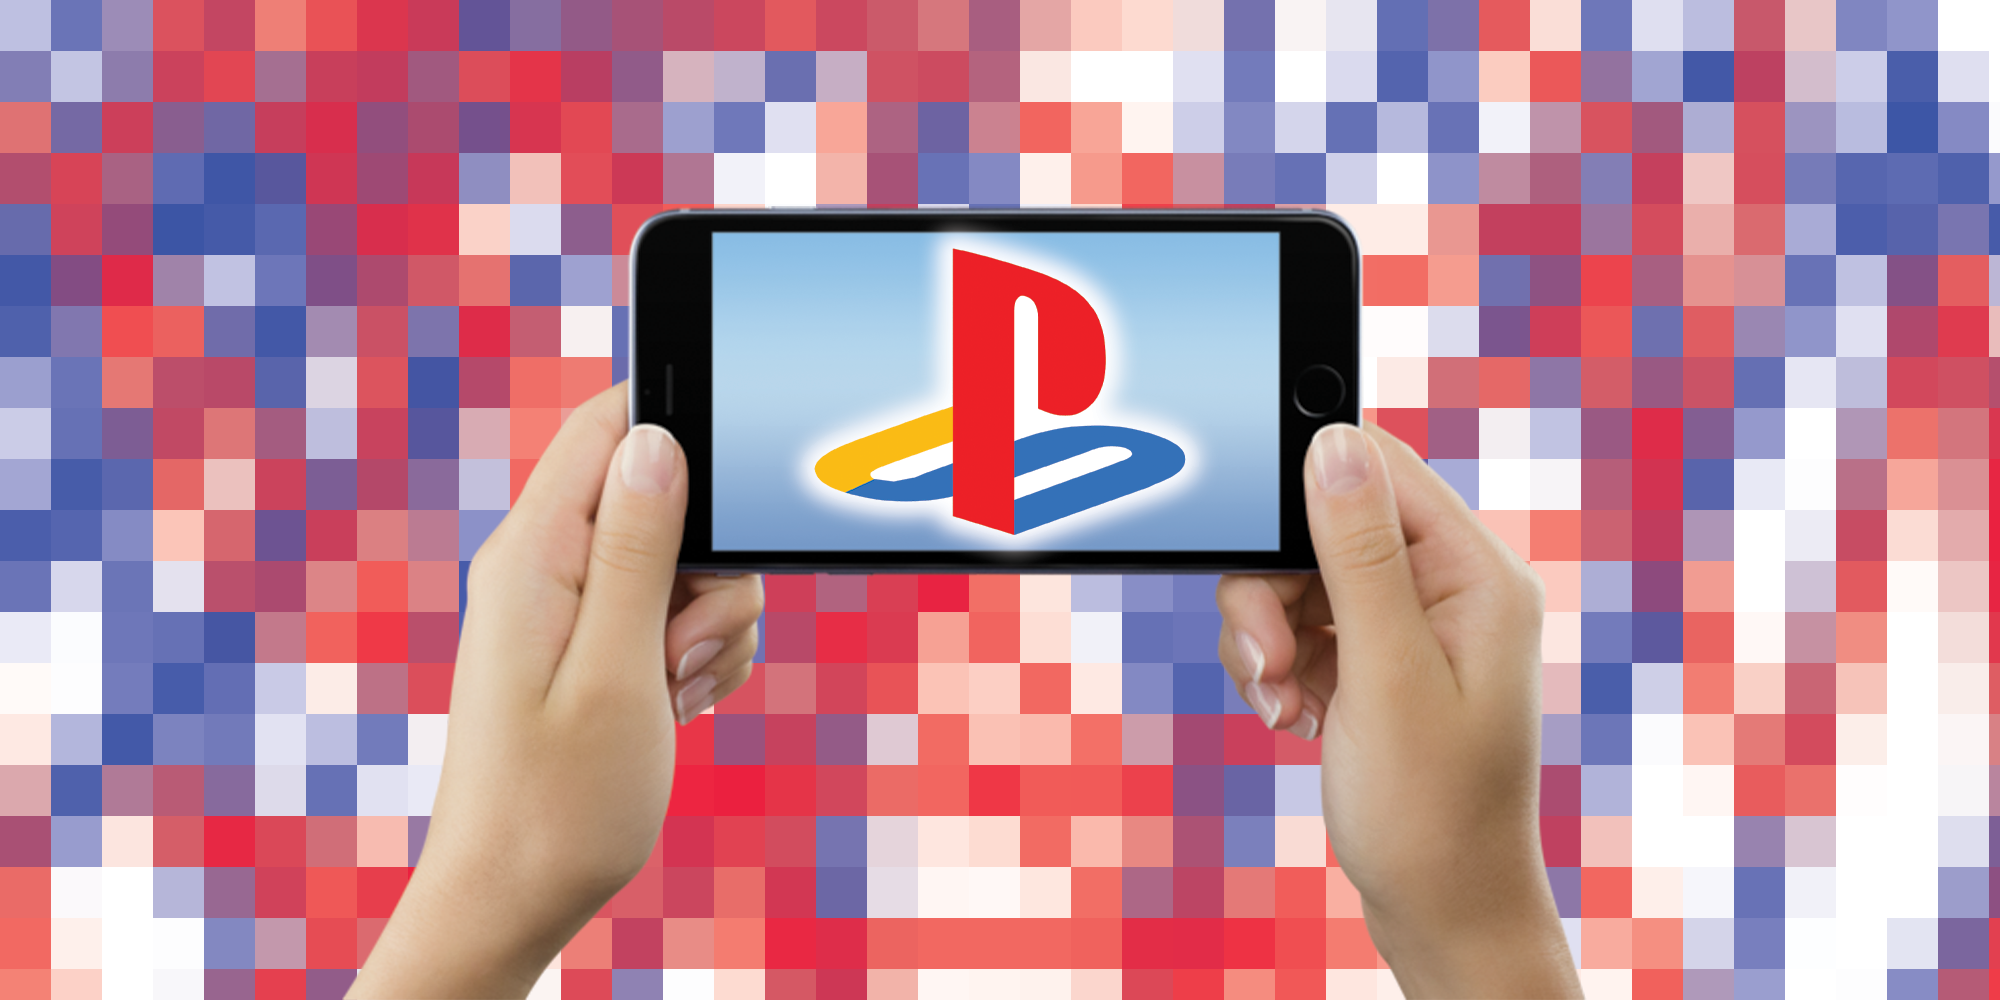 playstation mobile gaming on a smartphone